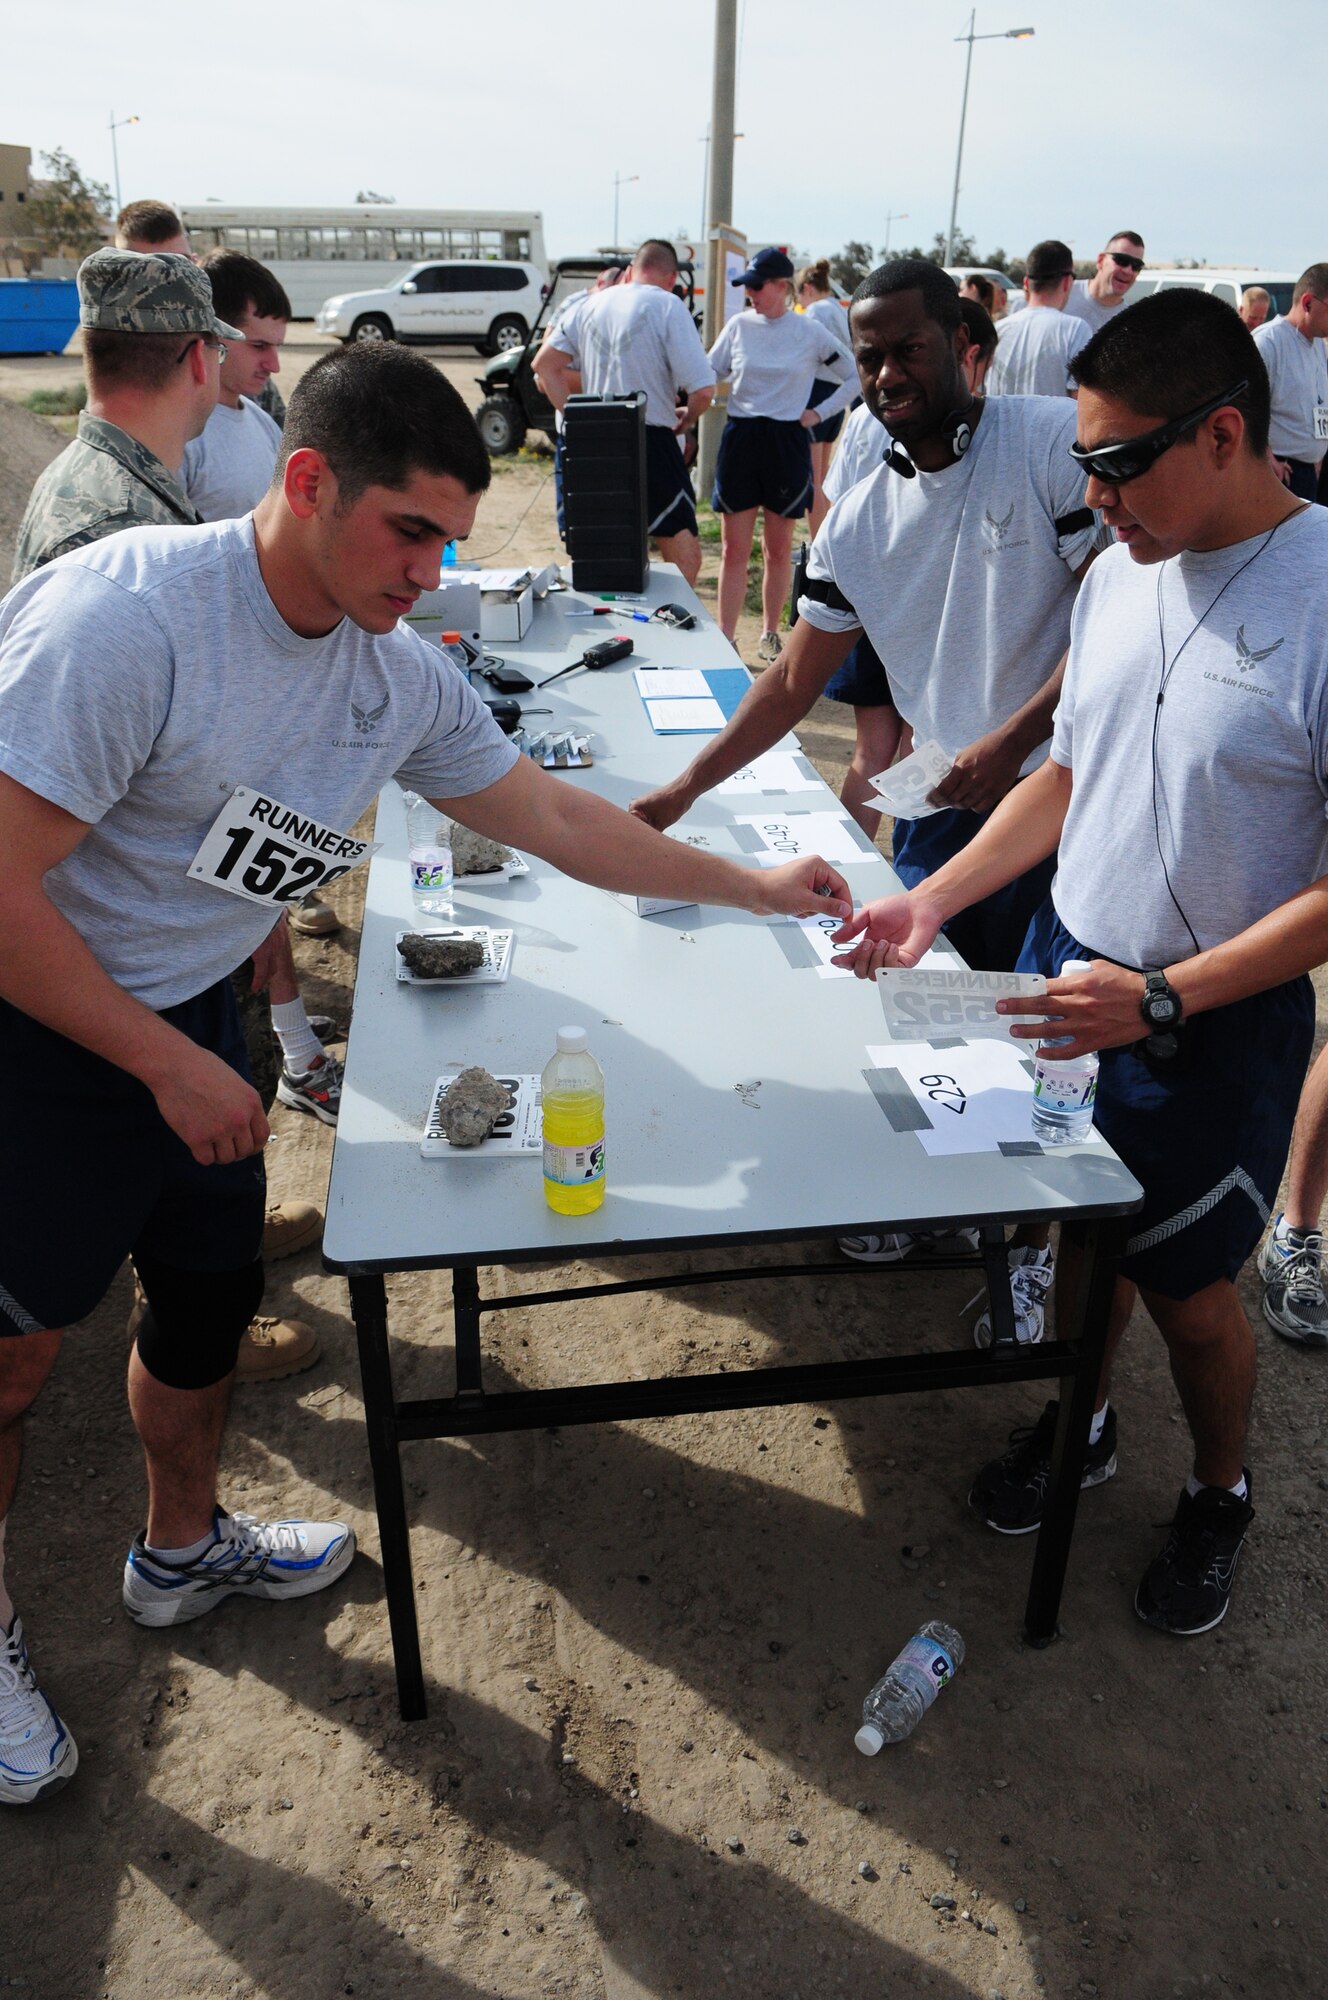 U.S. Air Force Staff Sgt. Adam Borrello, 386th Expeditionary Force Support Squadron, registers Armed Forces MLK run participants before the event Jan. 18, 2010 at an air base in Southwest Asia. About 150 servicemembers, Department of Defense civilians and contract personnel and coalition partners participated in the 10- and 5-kilometer race honoring Martin Luther King Jr. The event was sponsored by HFP Racing. (U.S. Air Force photo by Staff Sgt. Robert Sizelove/Released)